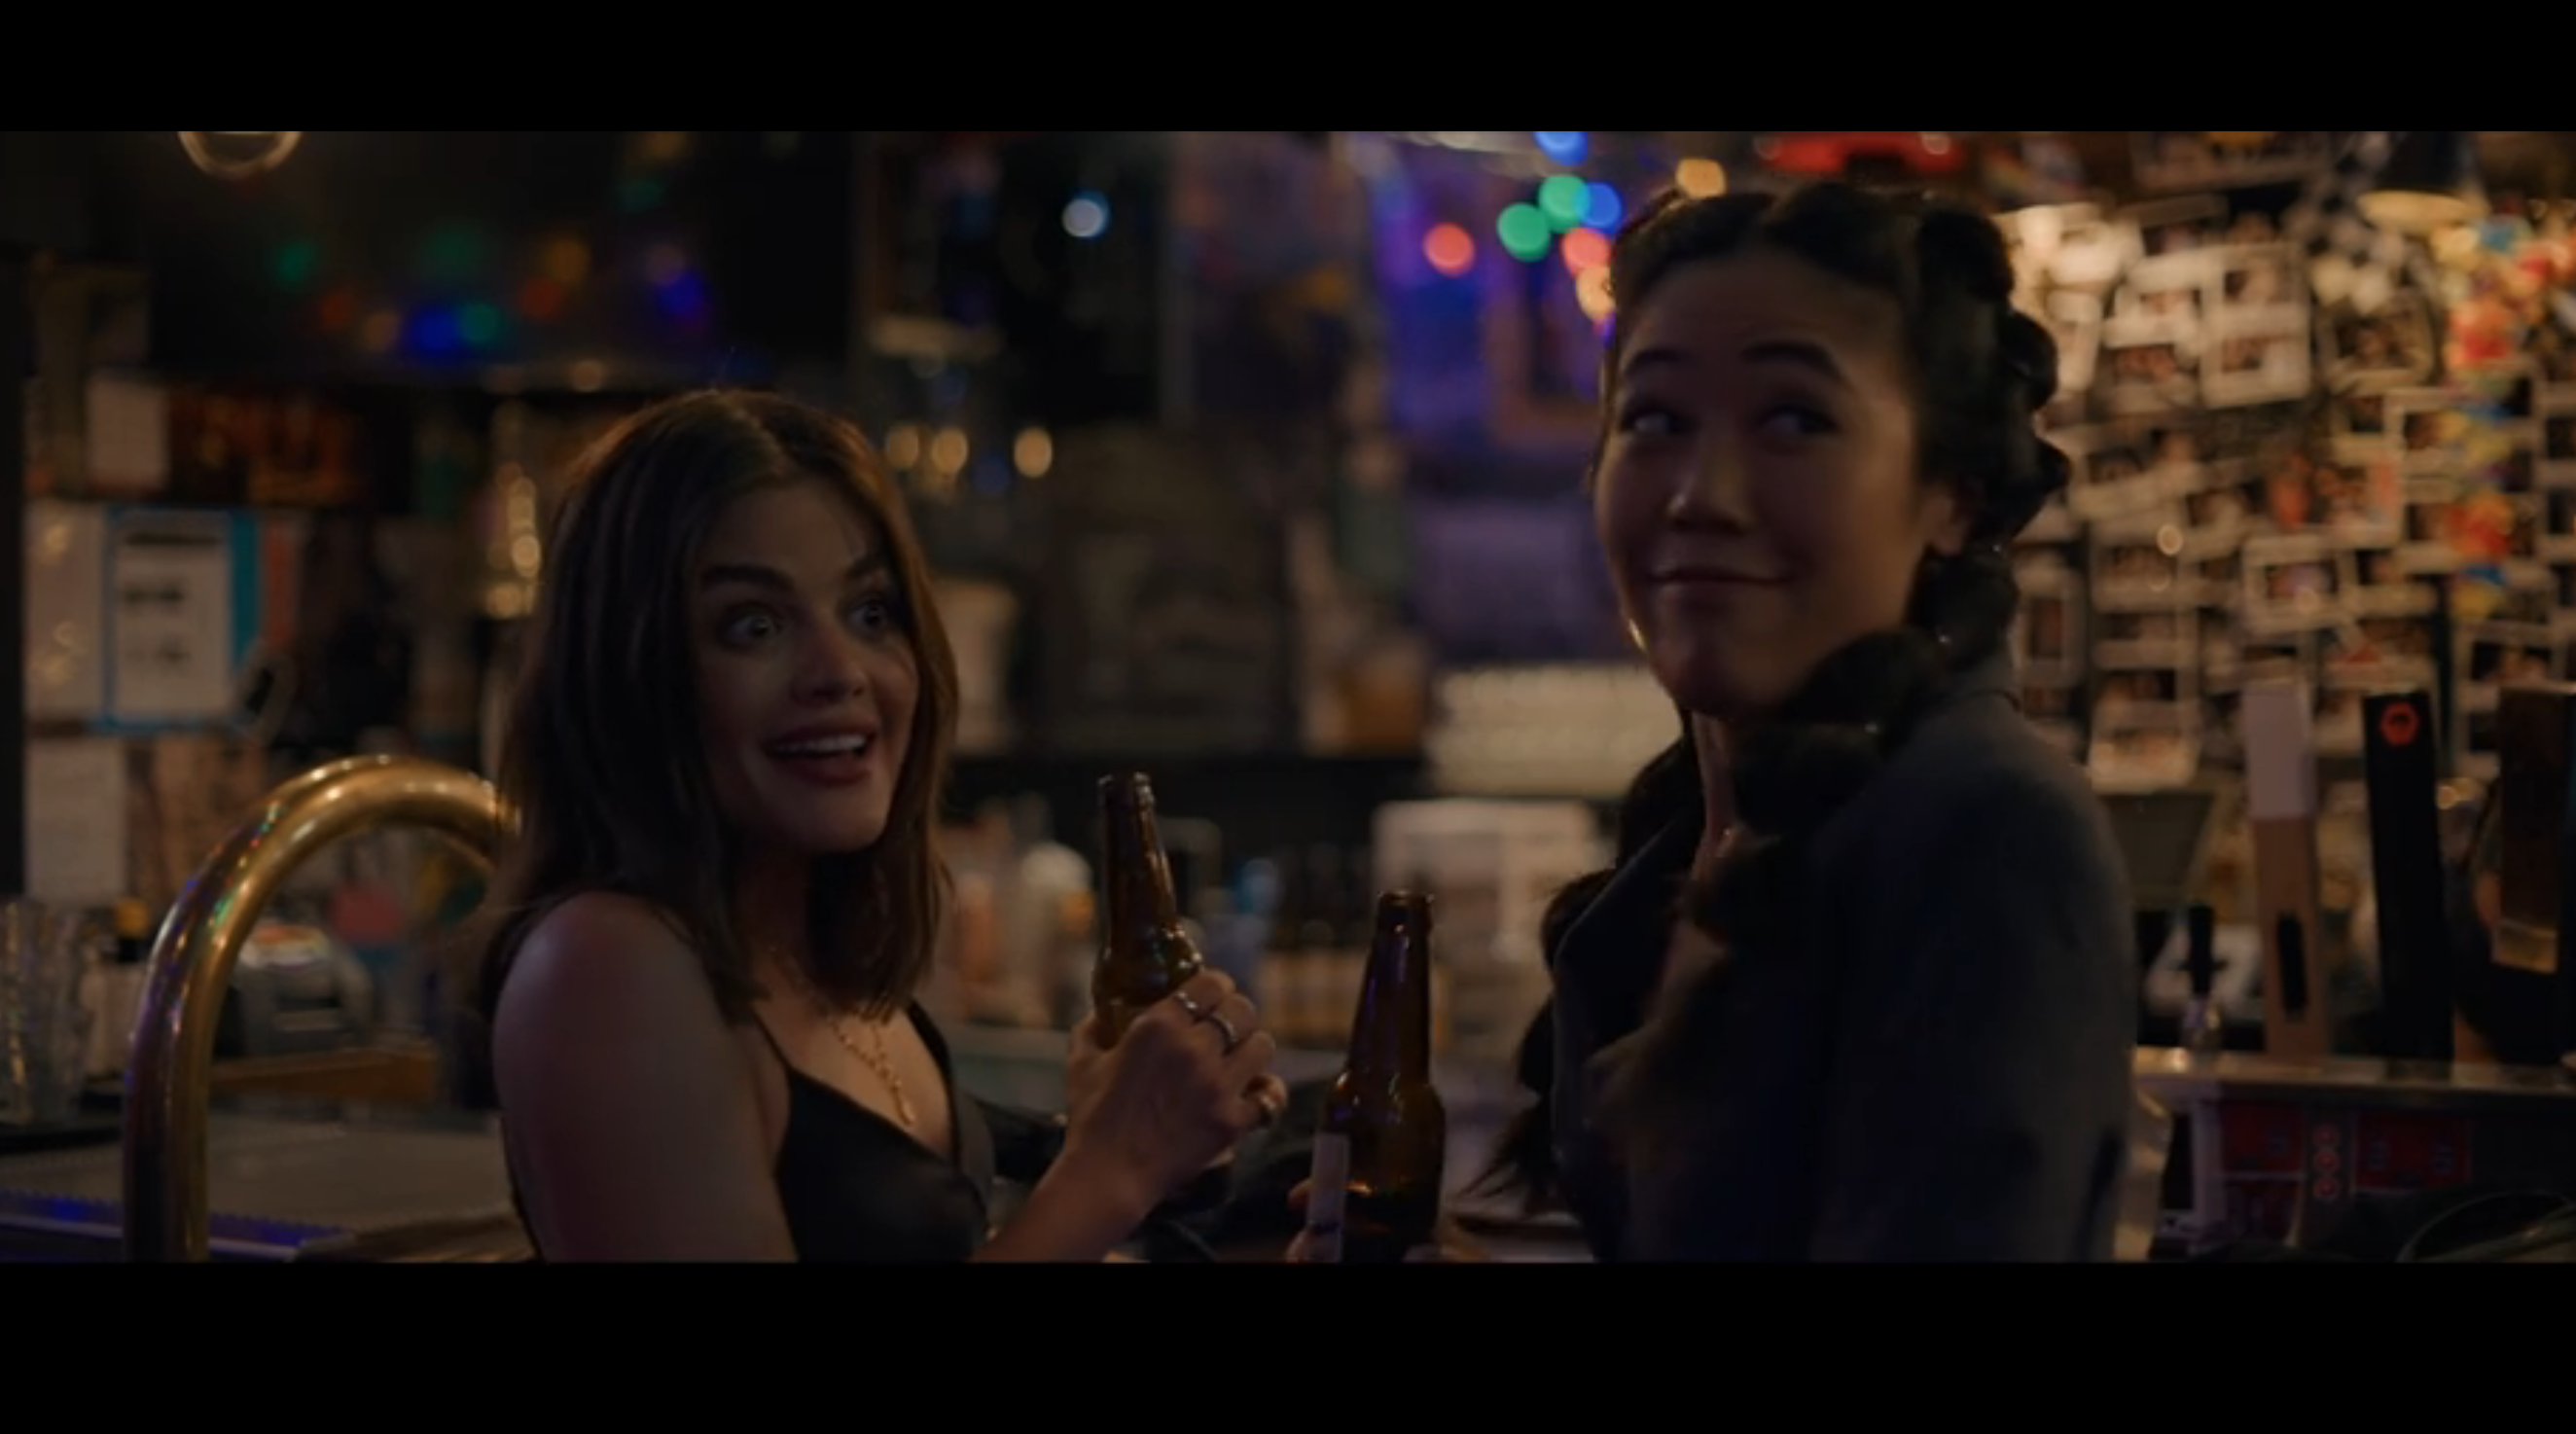 lucy hale and friend bump into someone at bar, look awkward